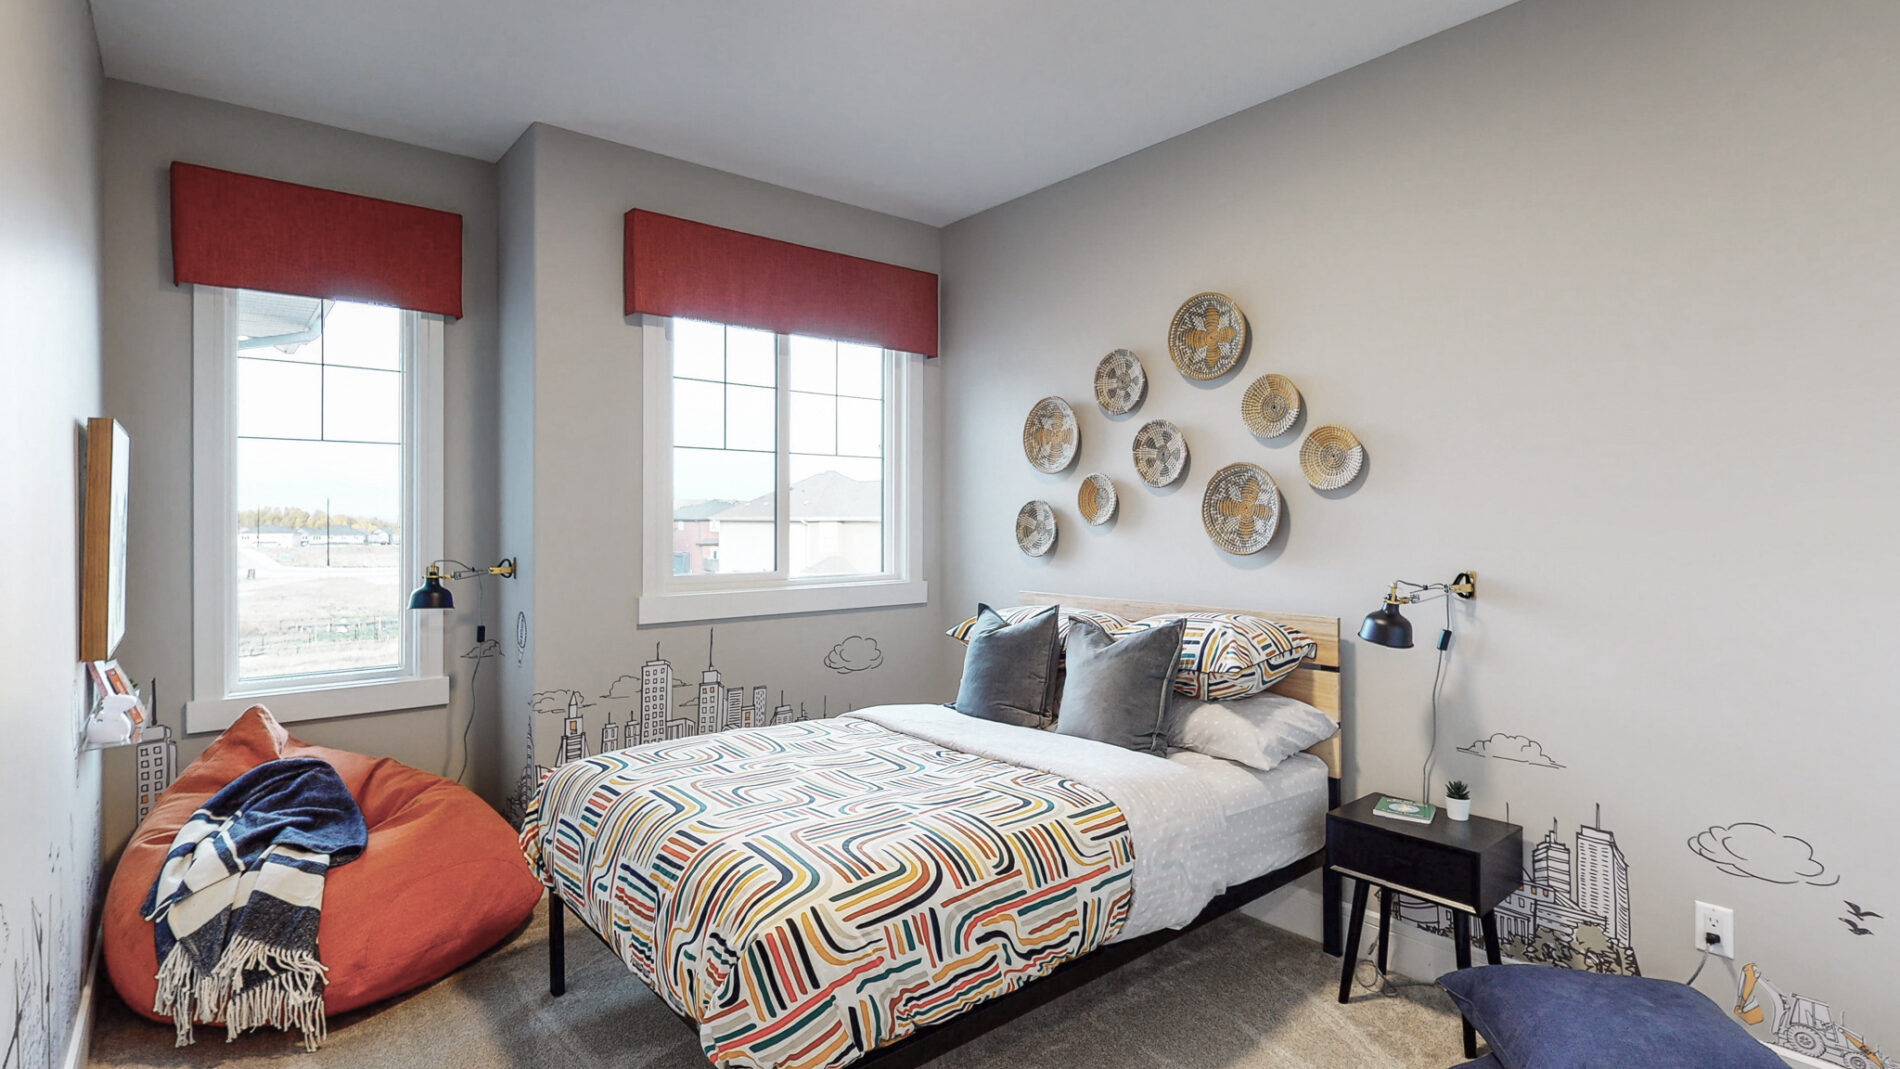 A secondary bedroom with fun multi-coloured bedding, bright accent valences on the windows and eclectic wall hangings